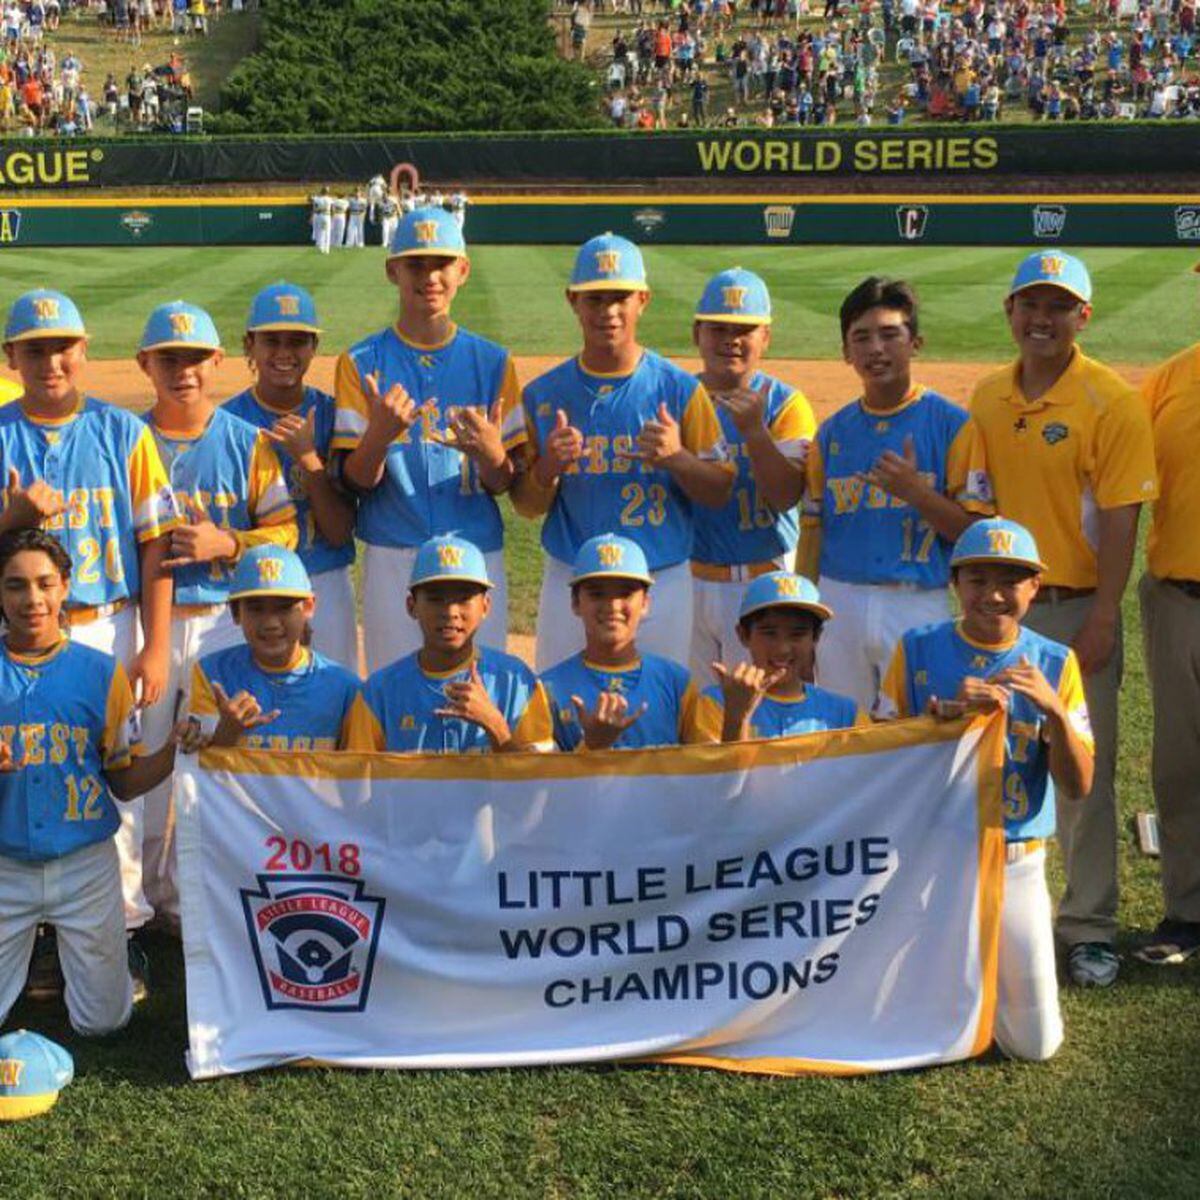 Who are some MLB players and celebrities that have participated in the LLWS?  - AS USA